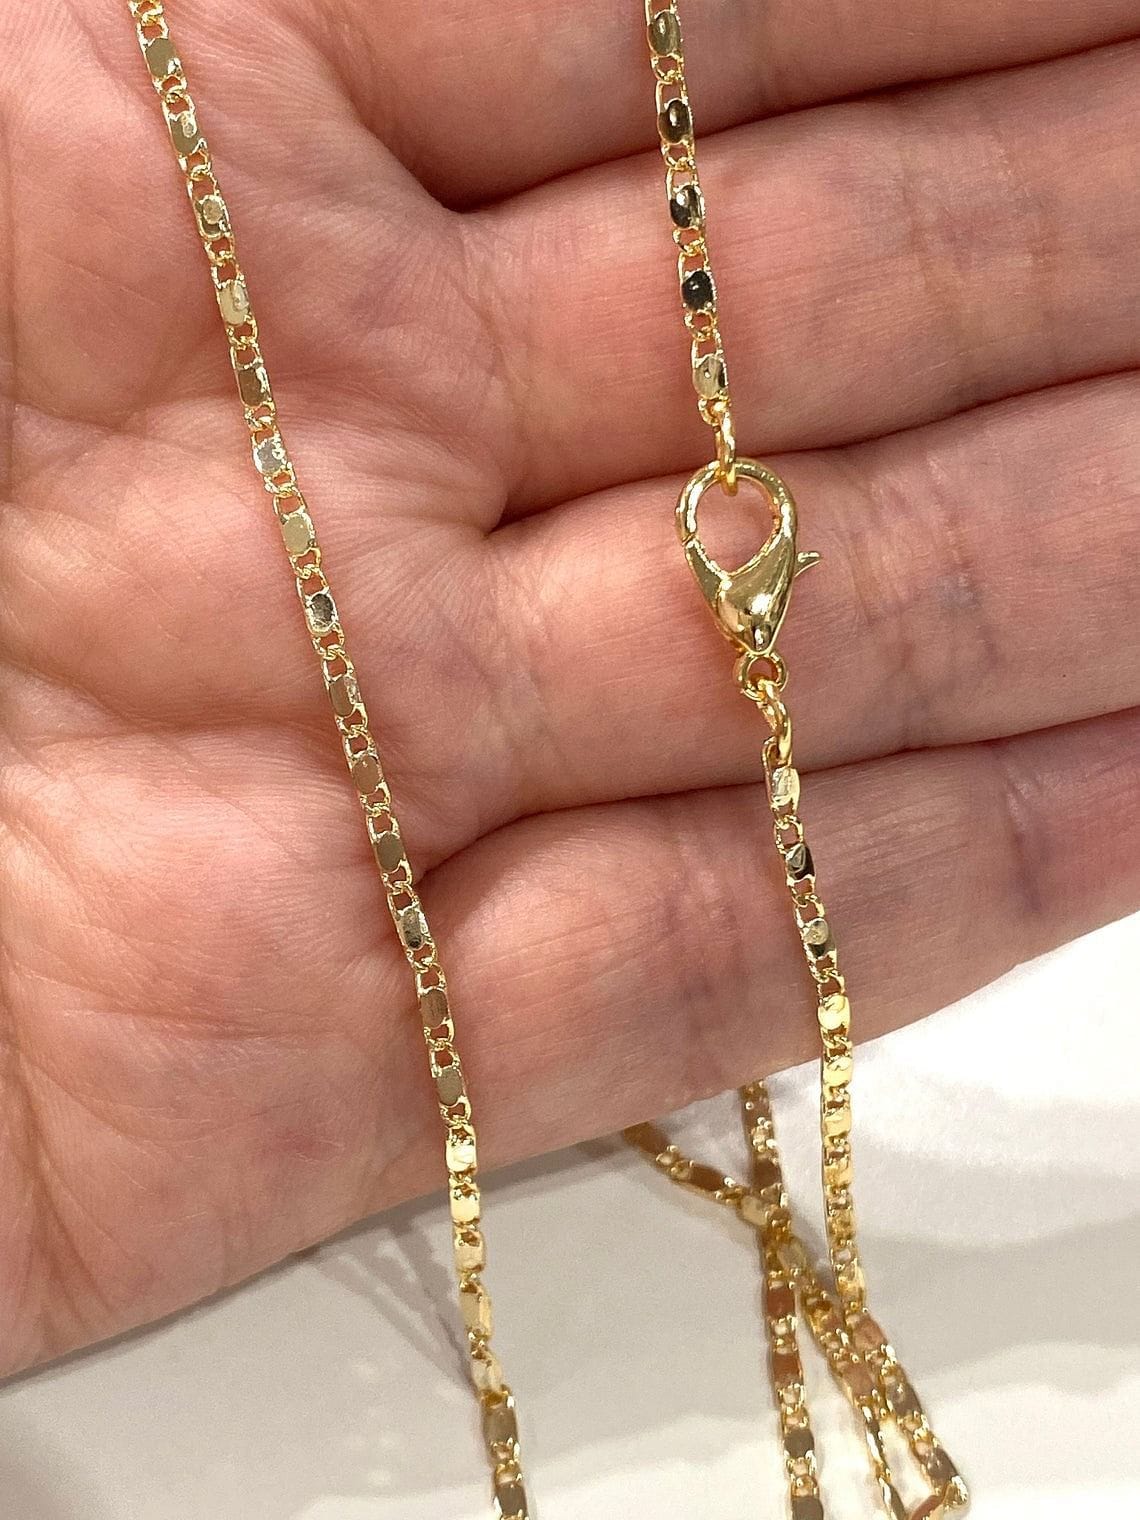 Gold Plated Jewelery Ready Made Necklace Chain